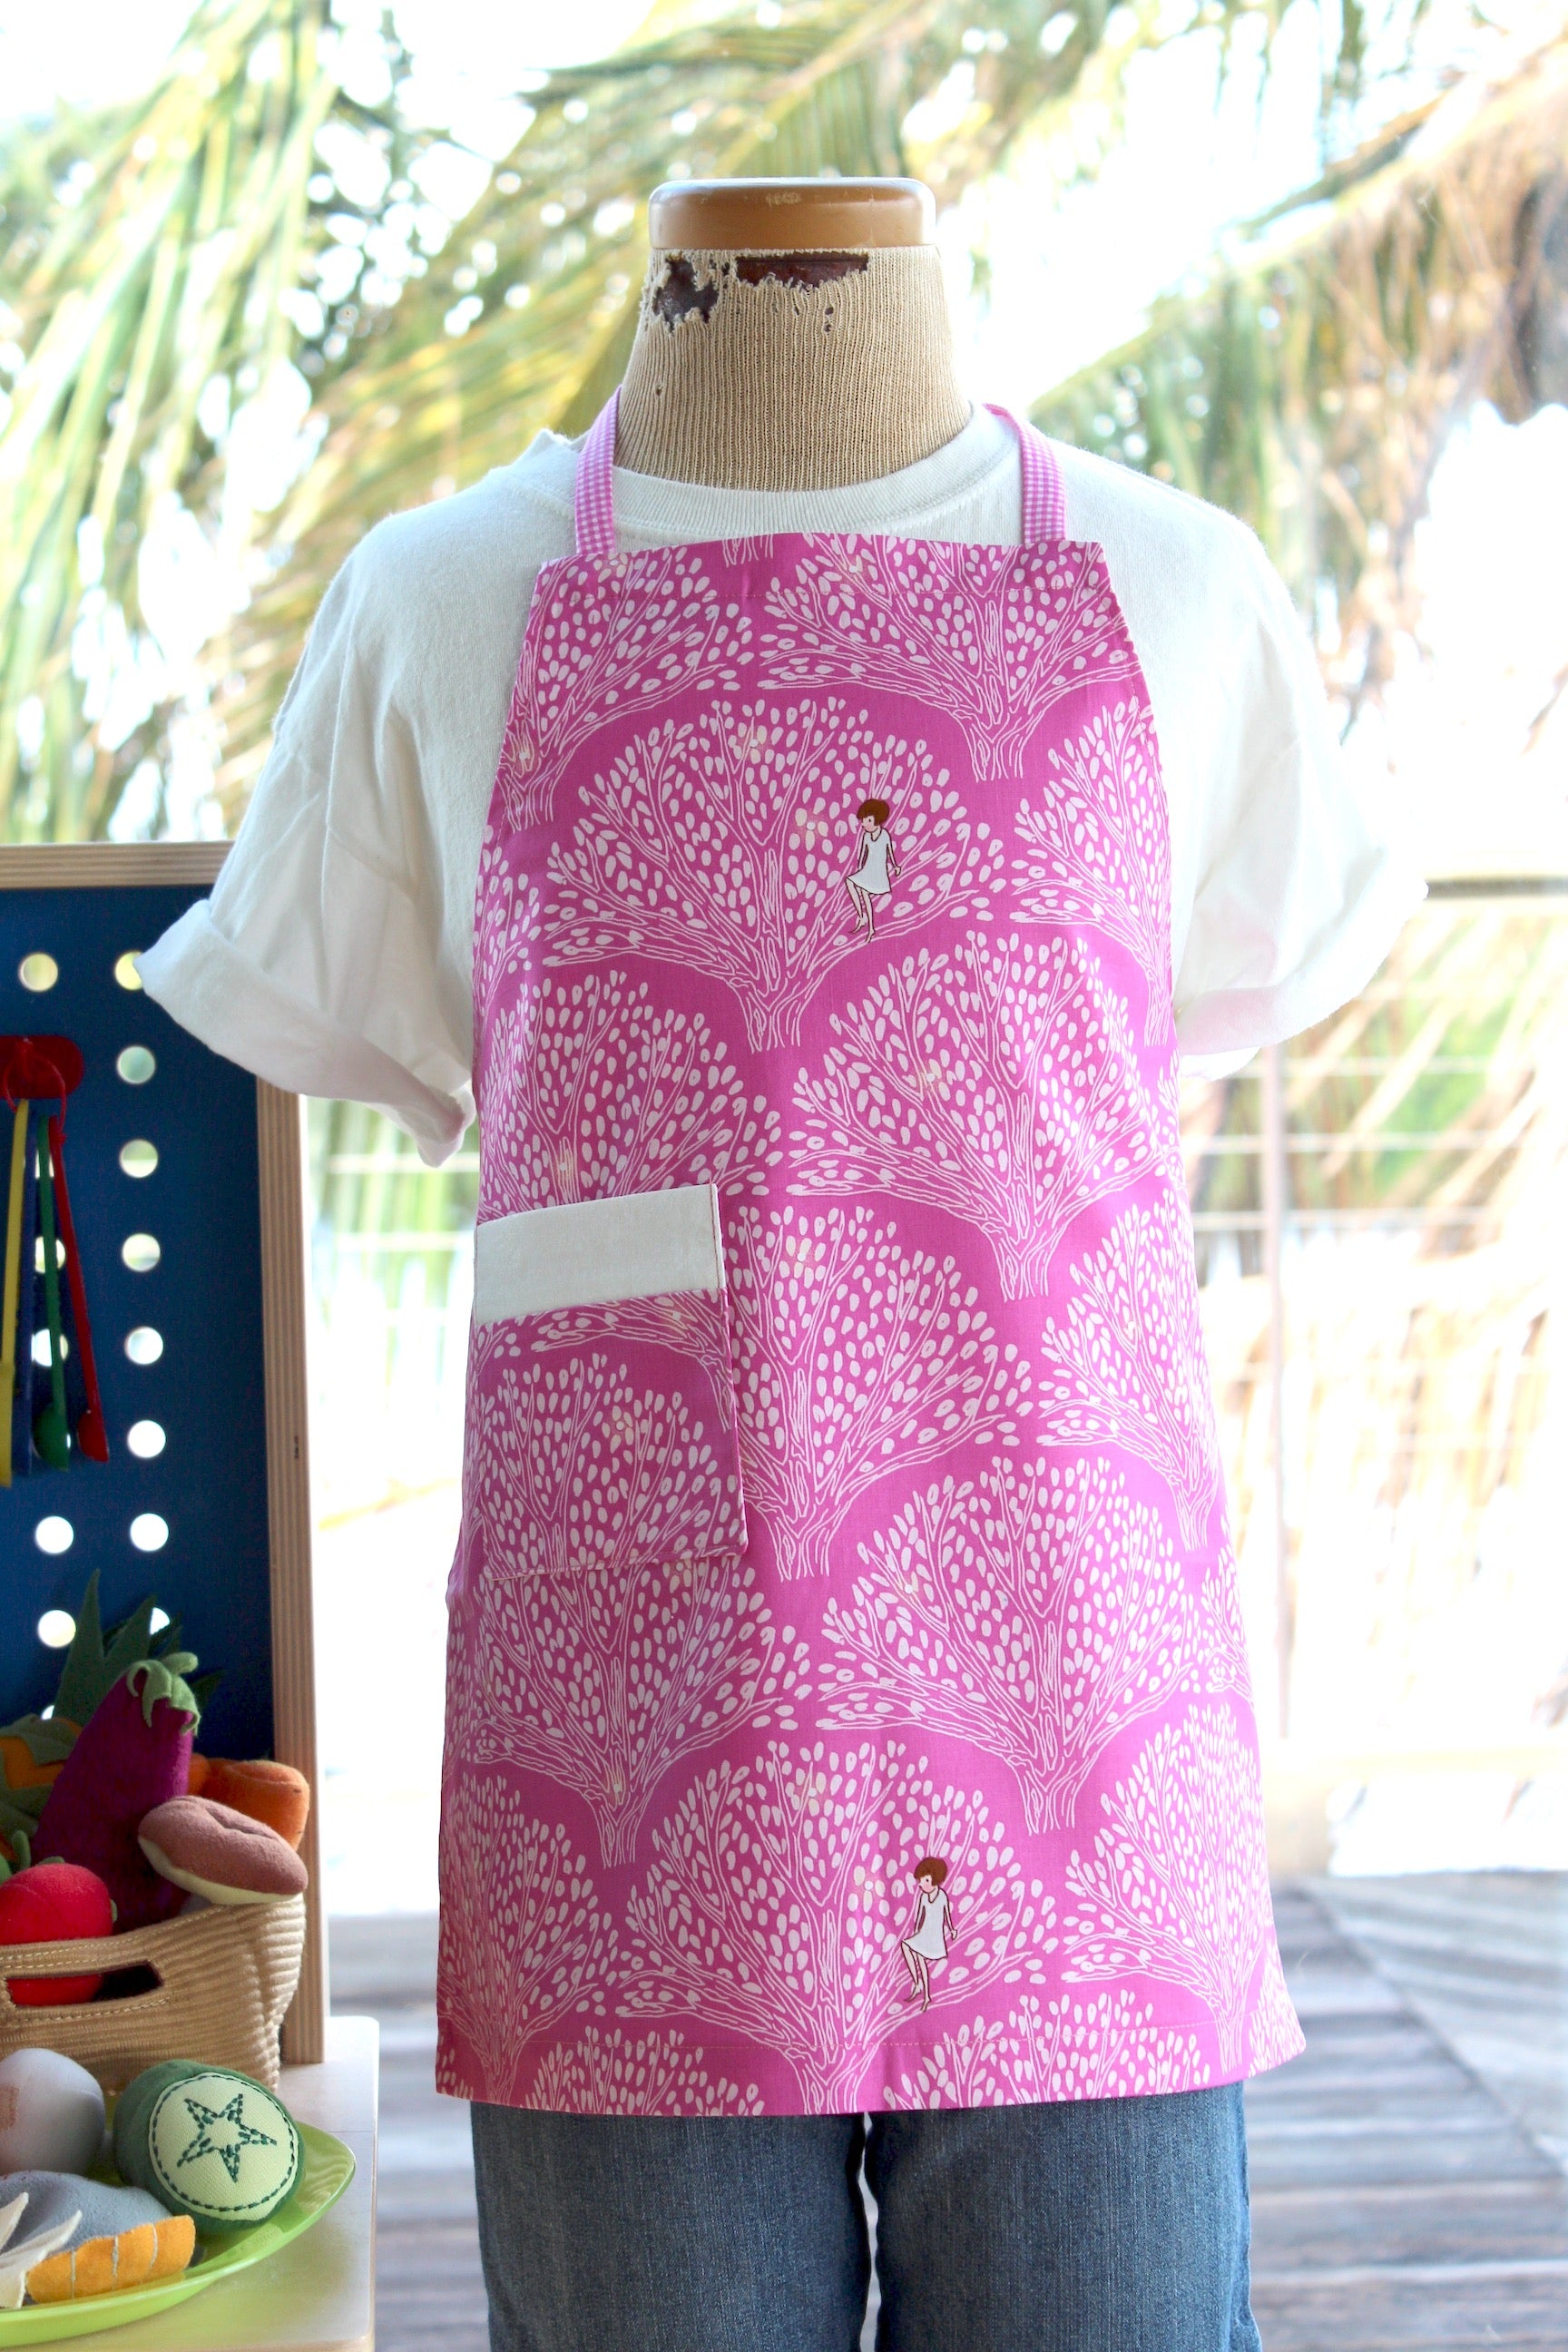 Wander Kid's Apron-The Blue Peony-Age Group_Kids,Category_Apron,Color_Pink,Department_Kitchen,Gender_Girls,Material_Cotton,Size_Medium (ages 6-11),Size_Small (ages up to 5)